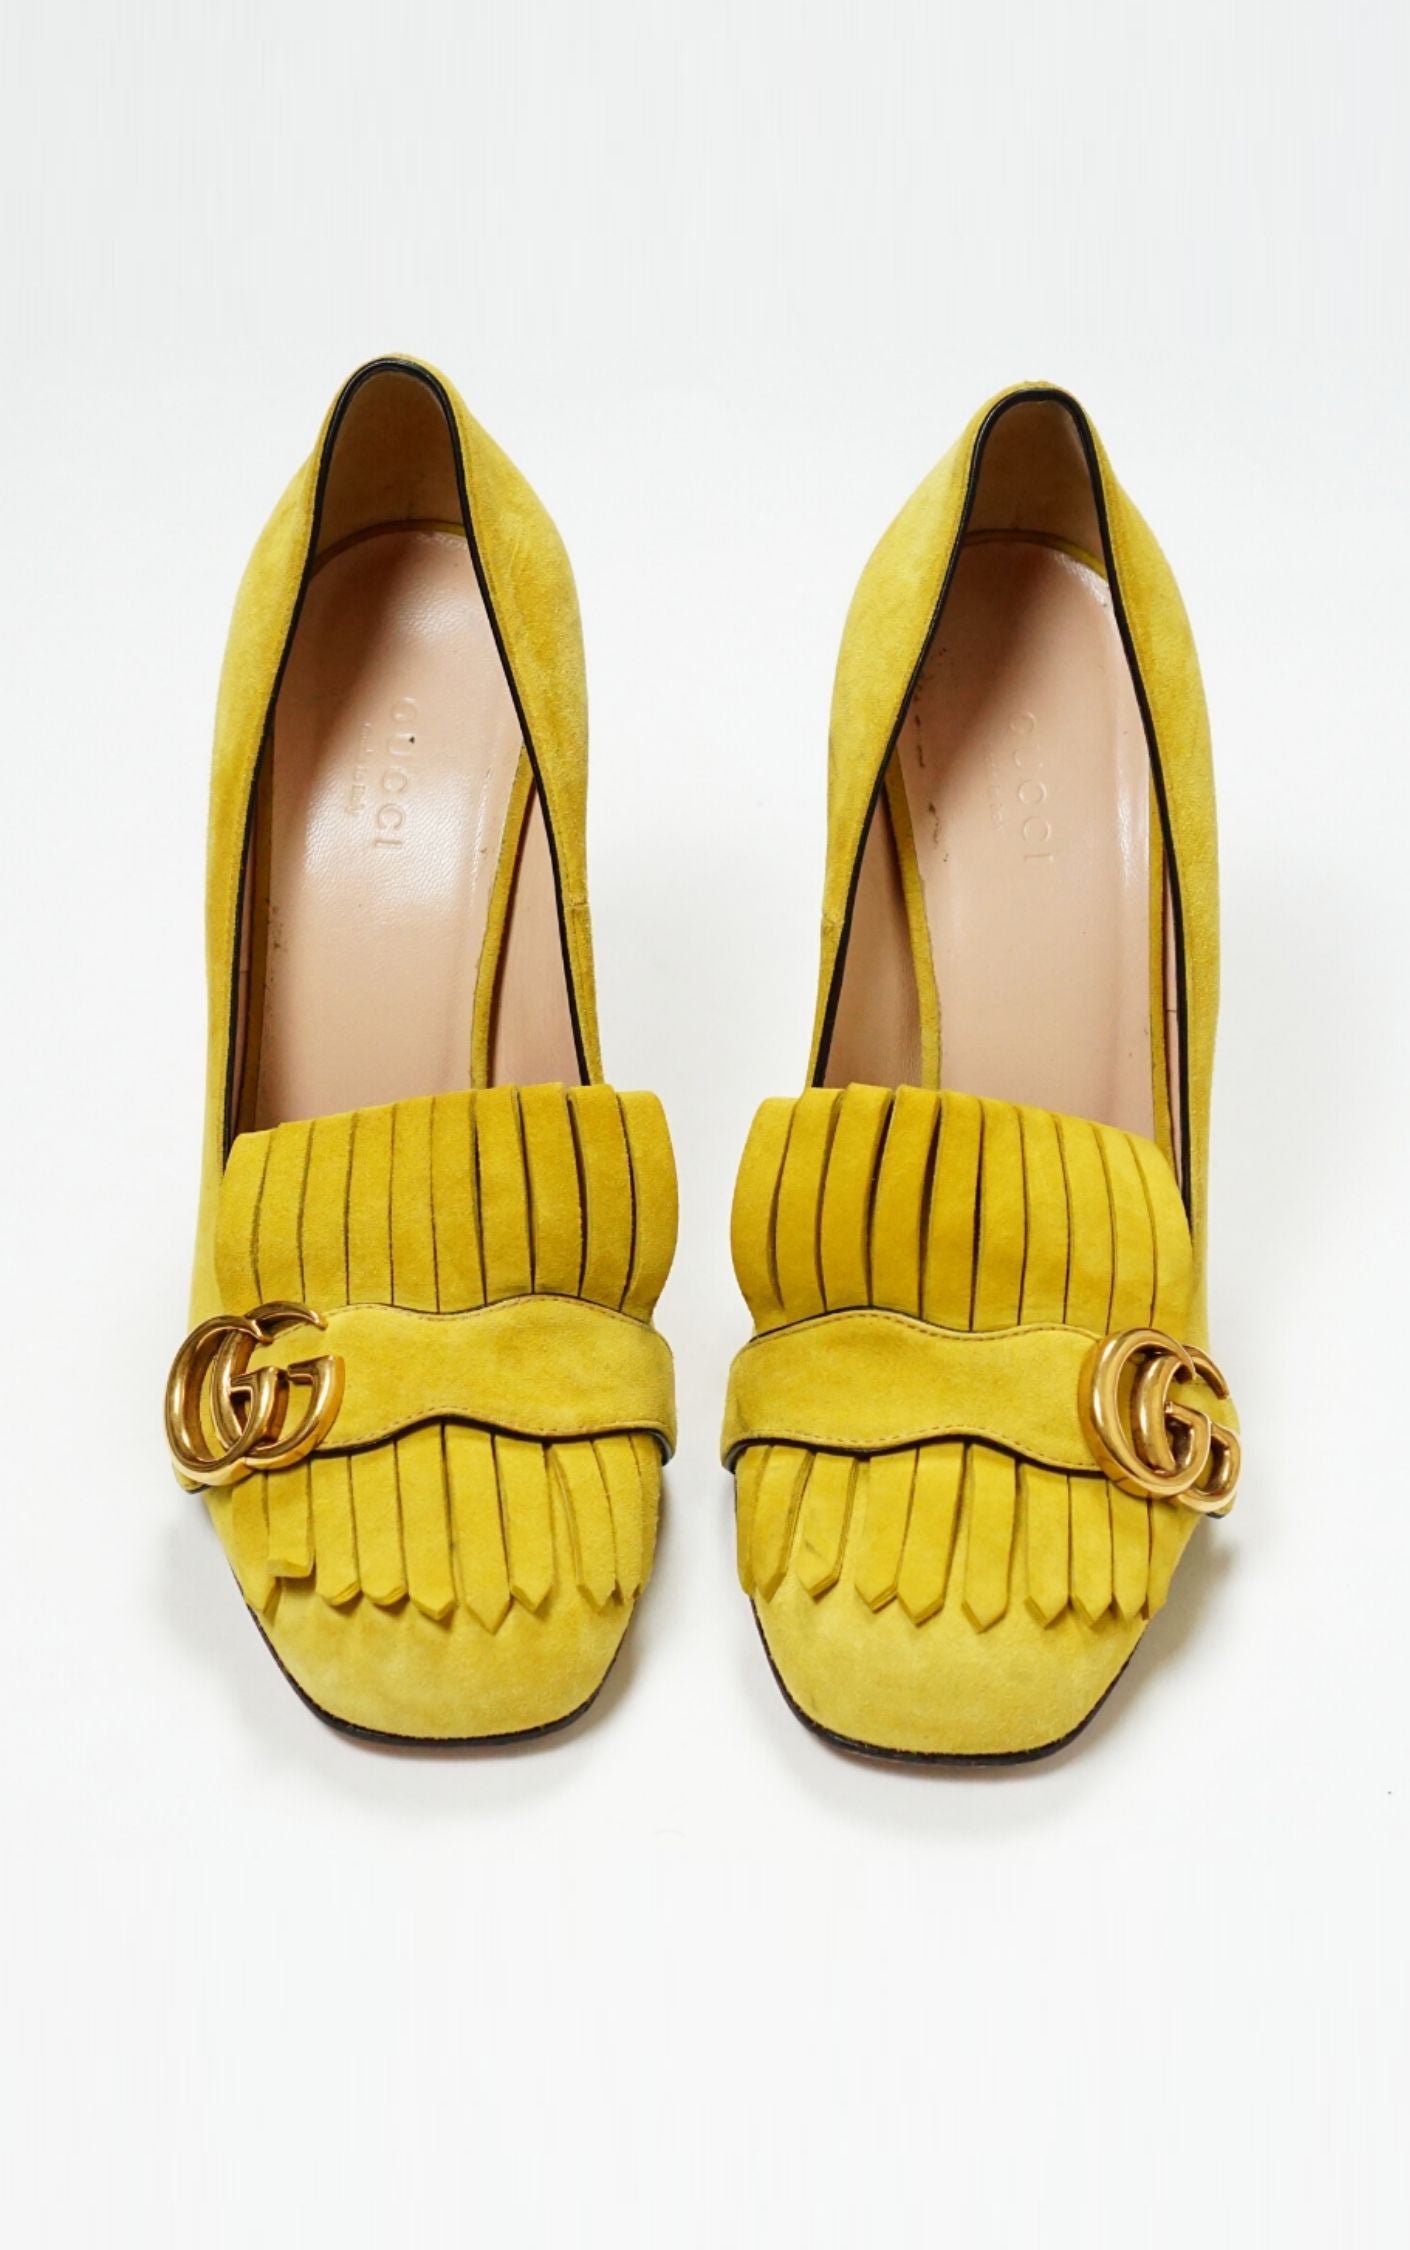 GUCCI Marmont Suede Yellow Loafer Pumps resellum